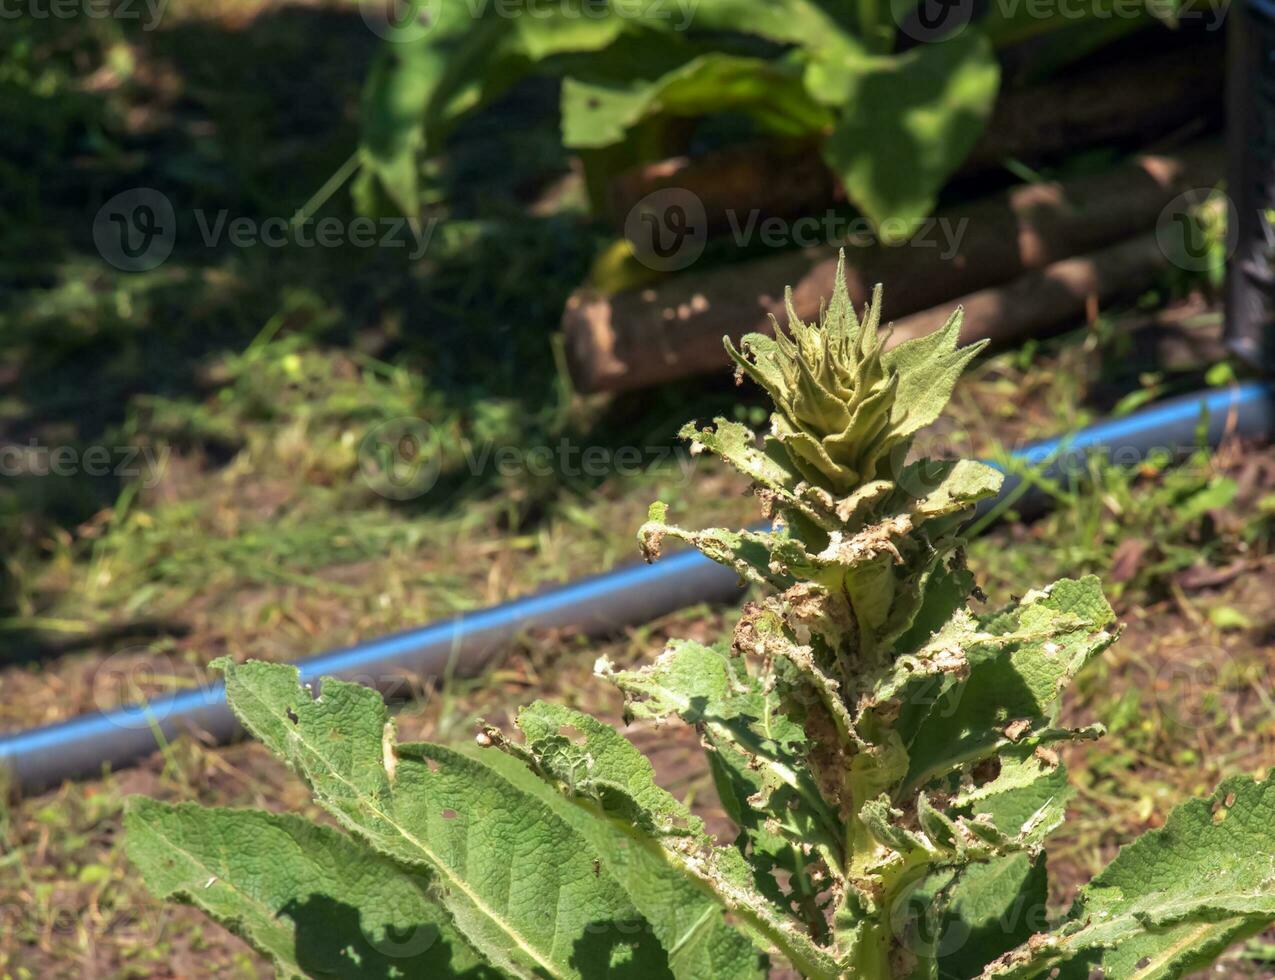 Verbascum thapsus, the great mullein or greater mullein. The plant is getting ready to flower. photo